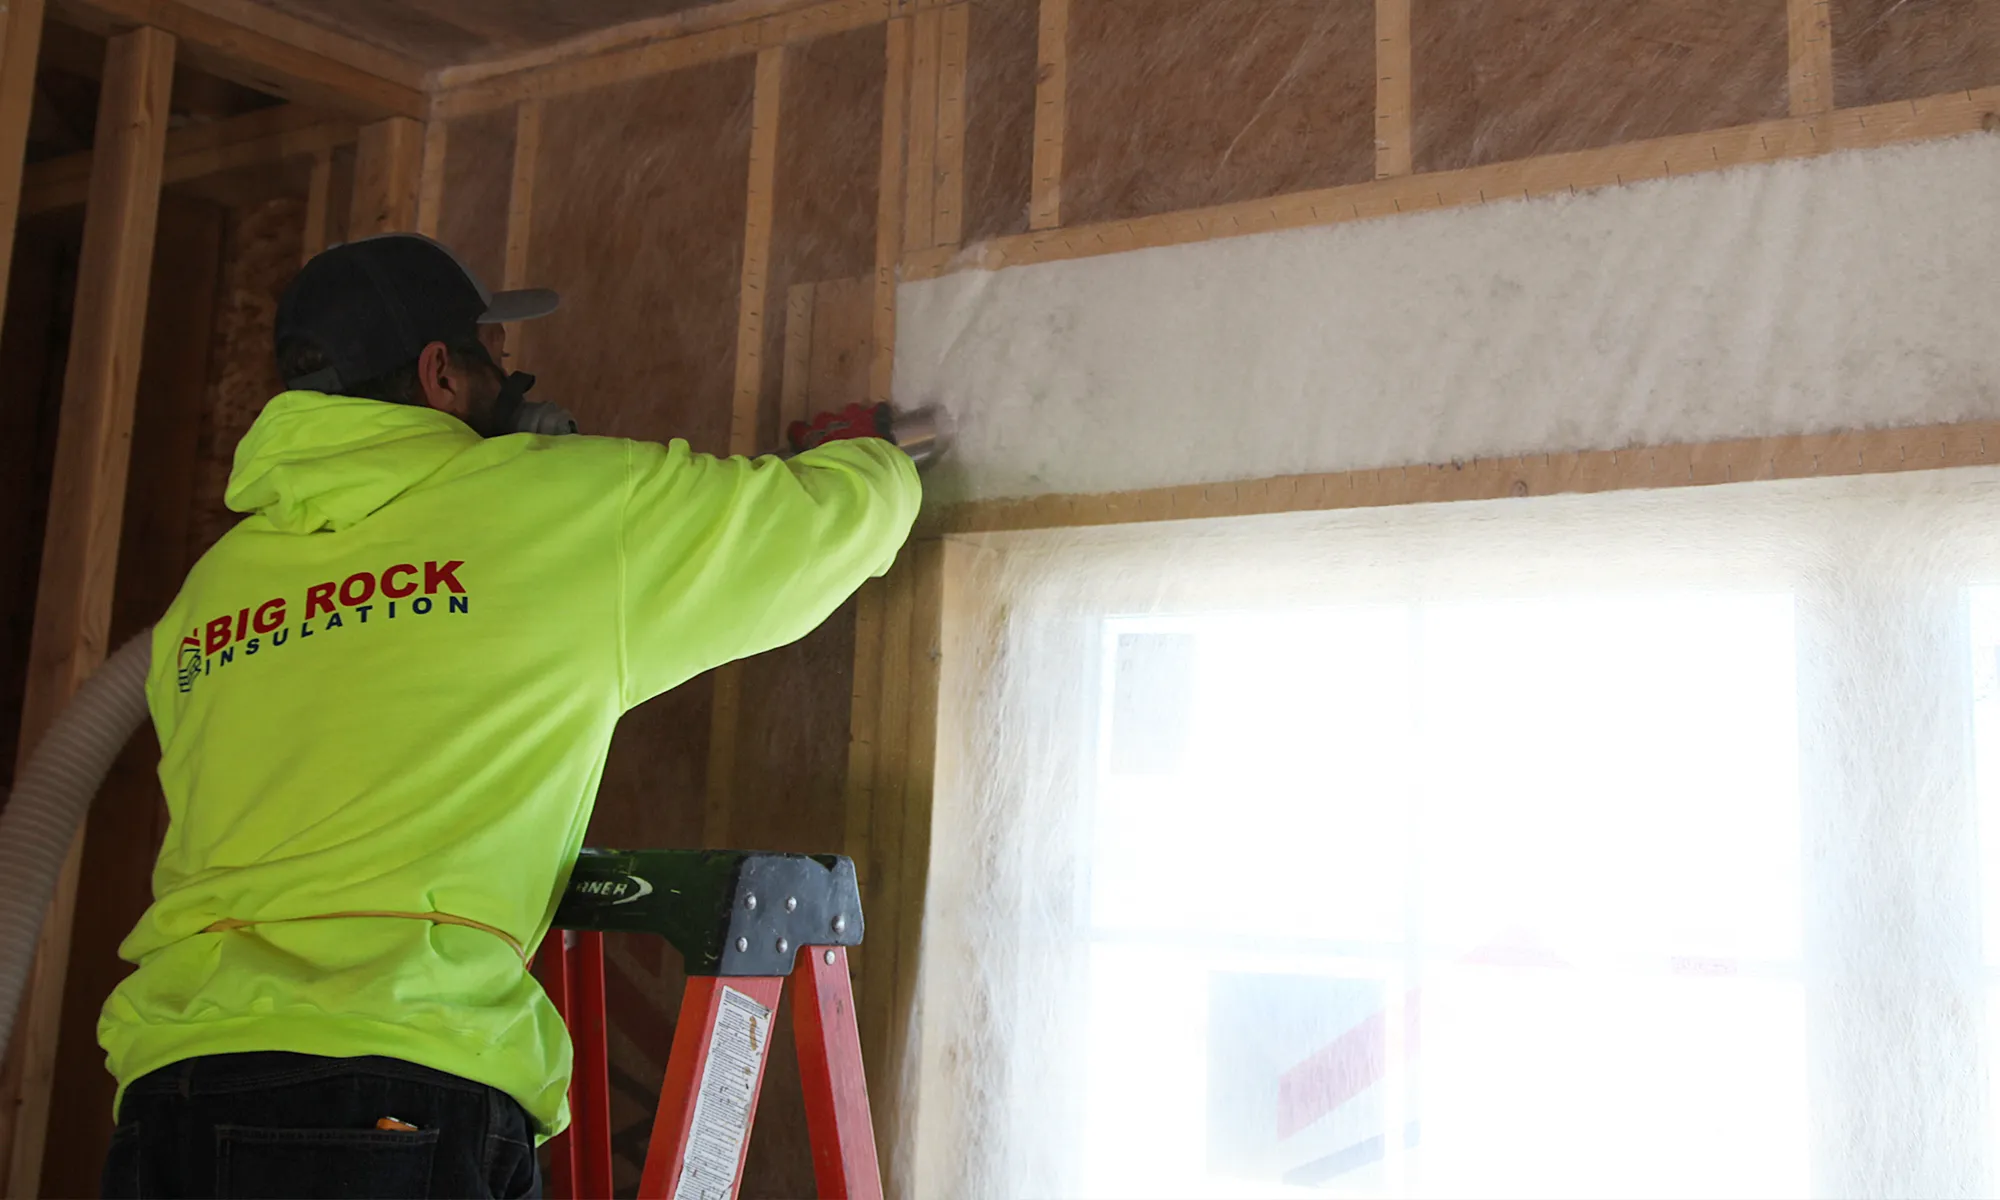 BIBS insulation being used